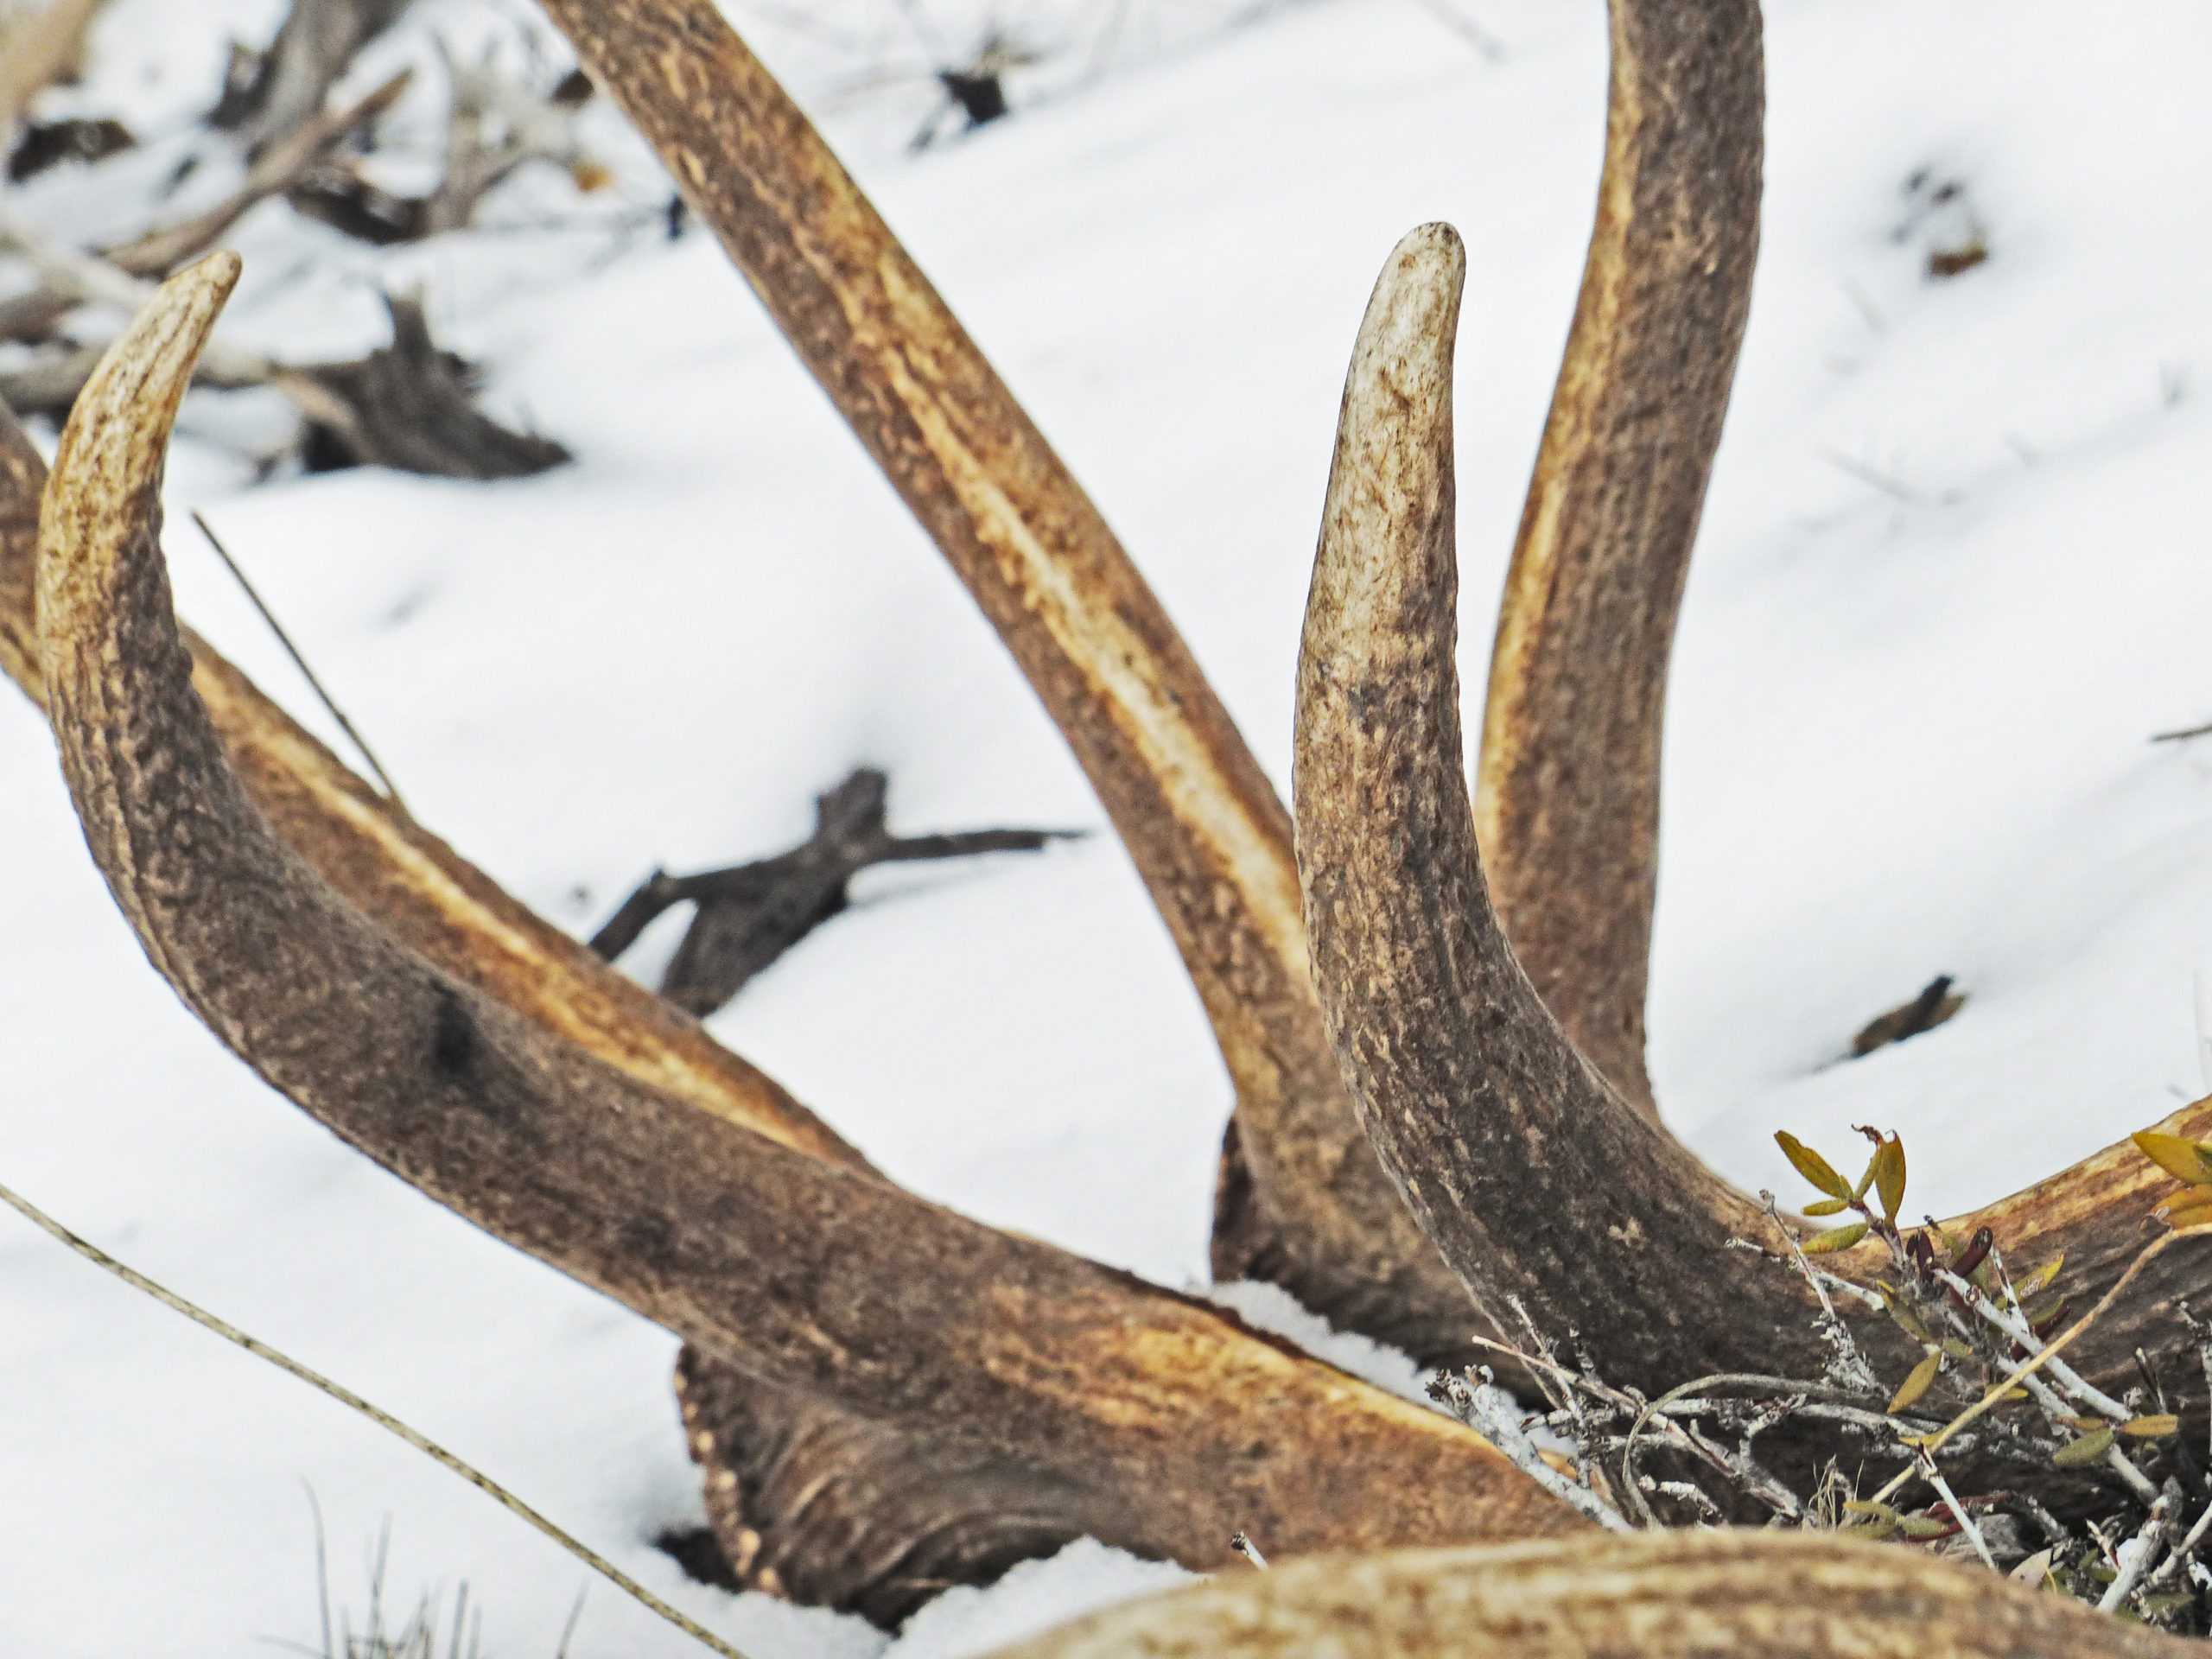 Nevada Sets Restrictions on Shed Hunting